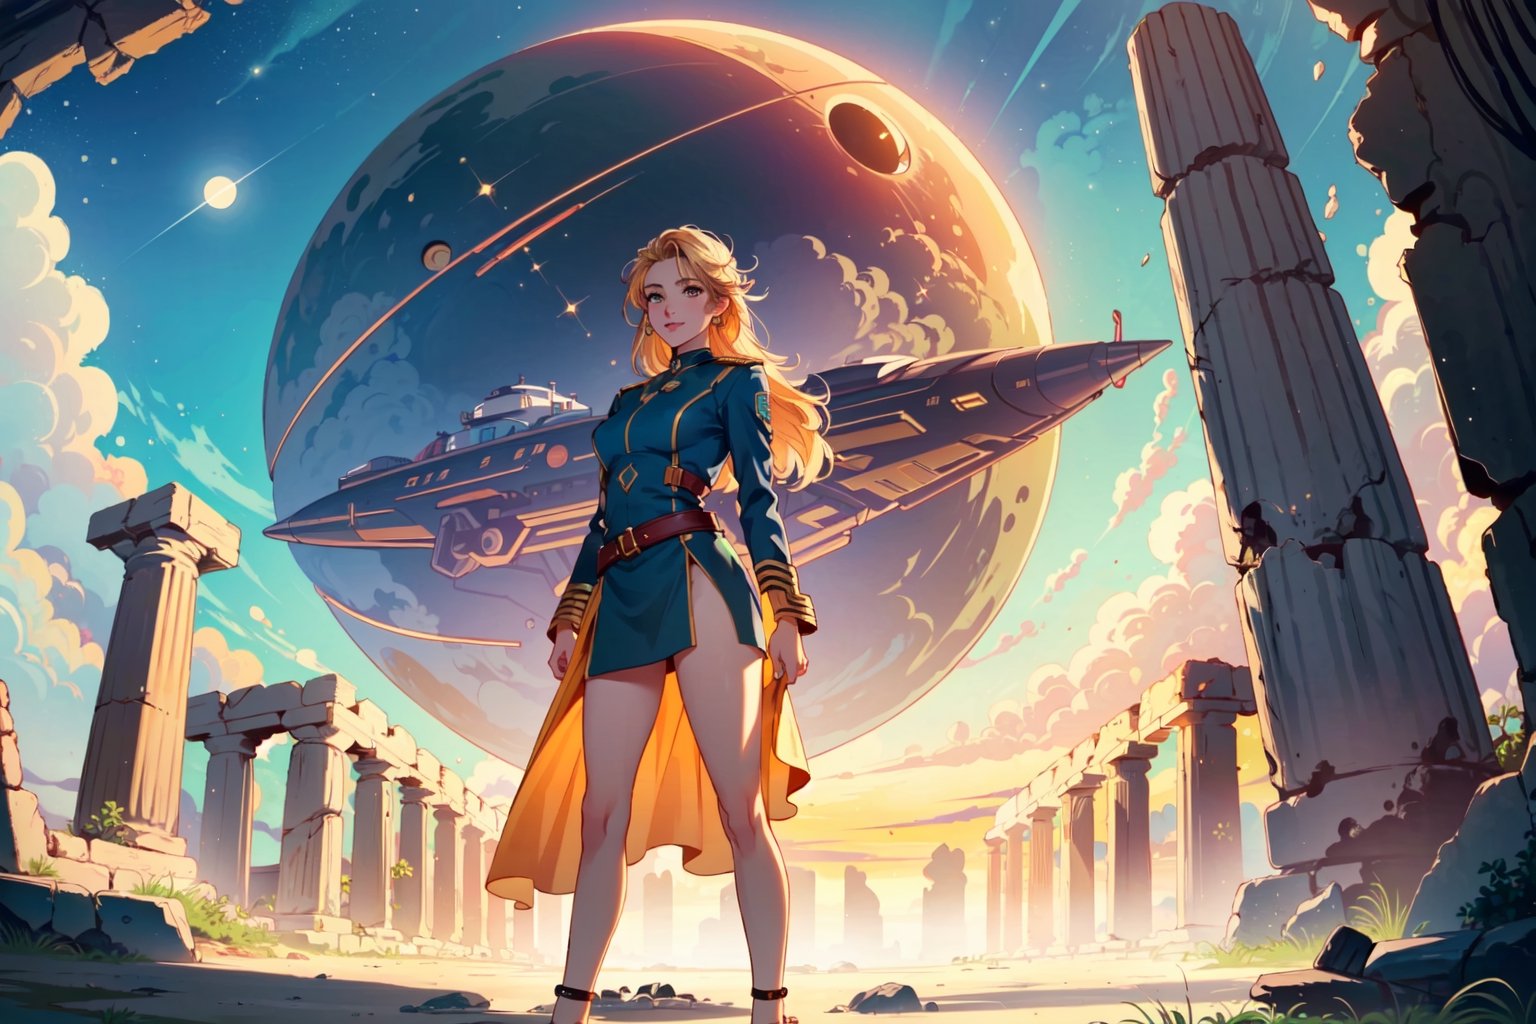 (((spaceship, futuristic, russian), ocean, captain_uniform), intricate, exquisite, aesthetic),

((highleg, hips), anklet, armlet, green_eyes), chocker, smile, blonde_long_hair, lipstick, female_solo,

((greek_ruins, beach), sky, mountainsб full_eclipse), stars, [clouds]

((colors violet / yellow / red / orange / indigo, colors enhanced), outline, light_particles), dreamy glow, warm light, bokeh, 35mm-lens,

((((masterpiece, best quality, perfect visual), super detailed), sharp image, professional artwork), 8K, HDR),